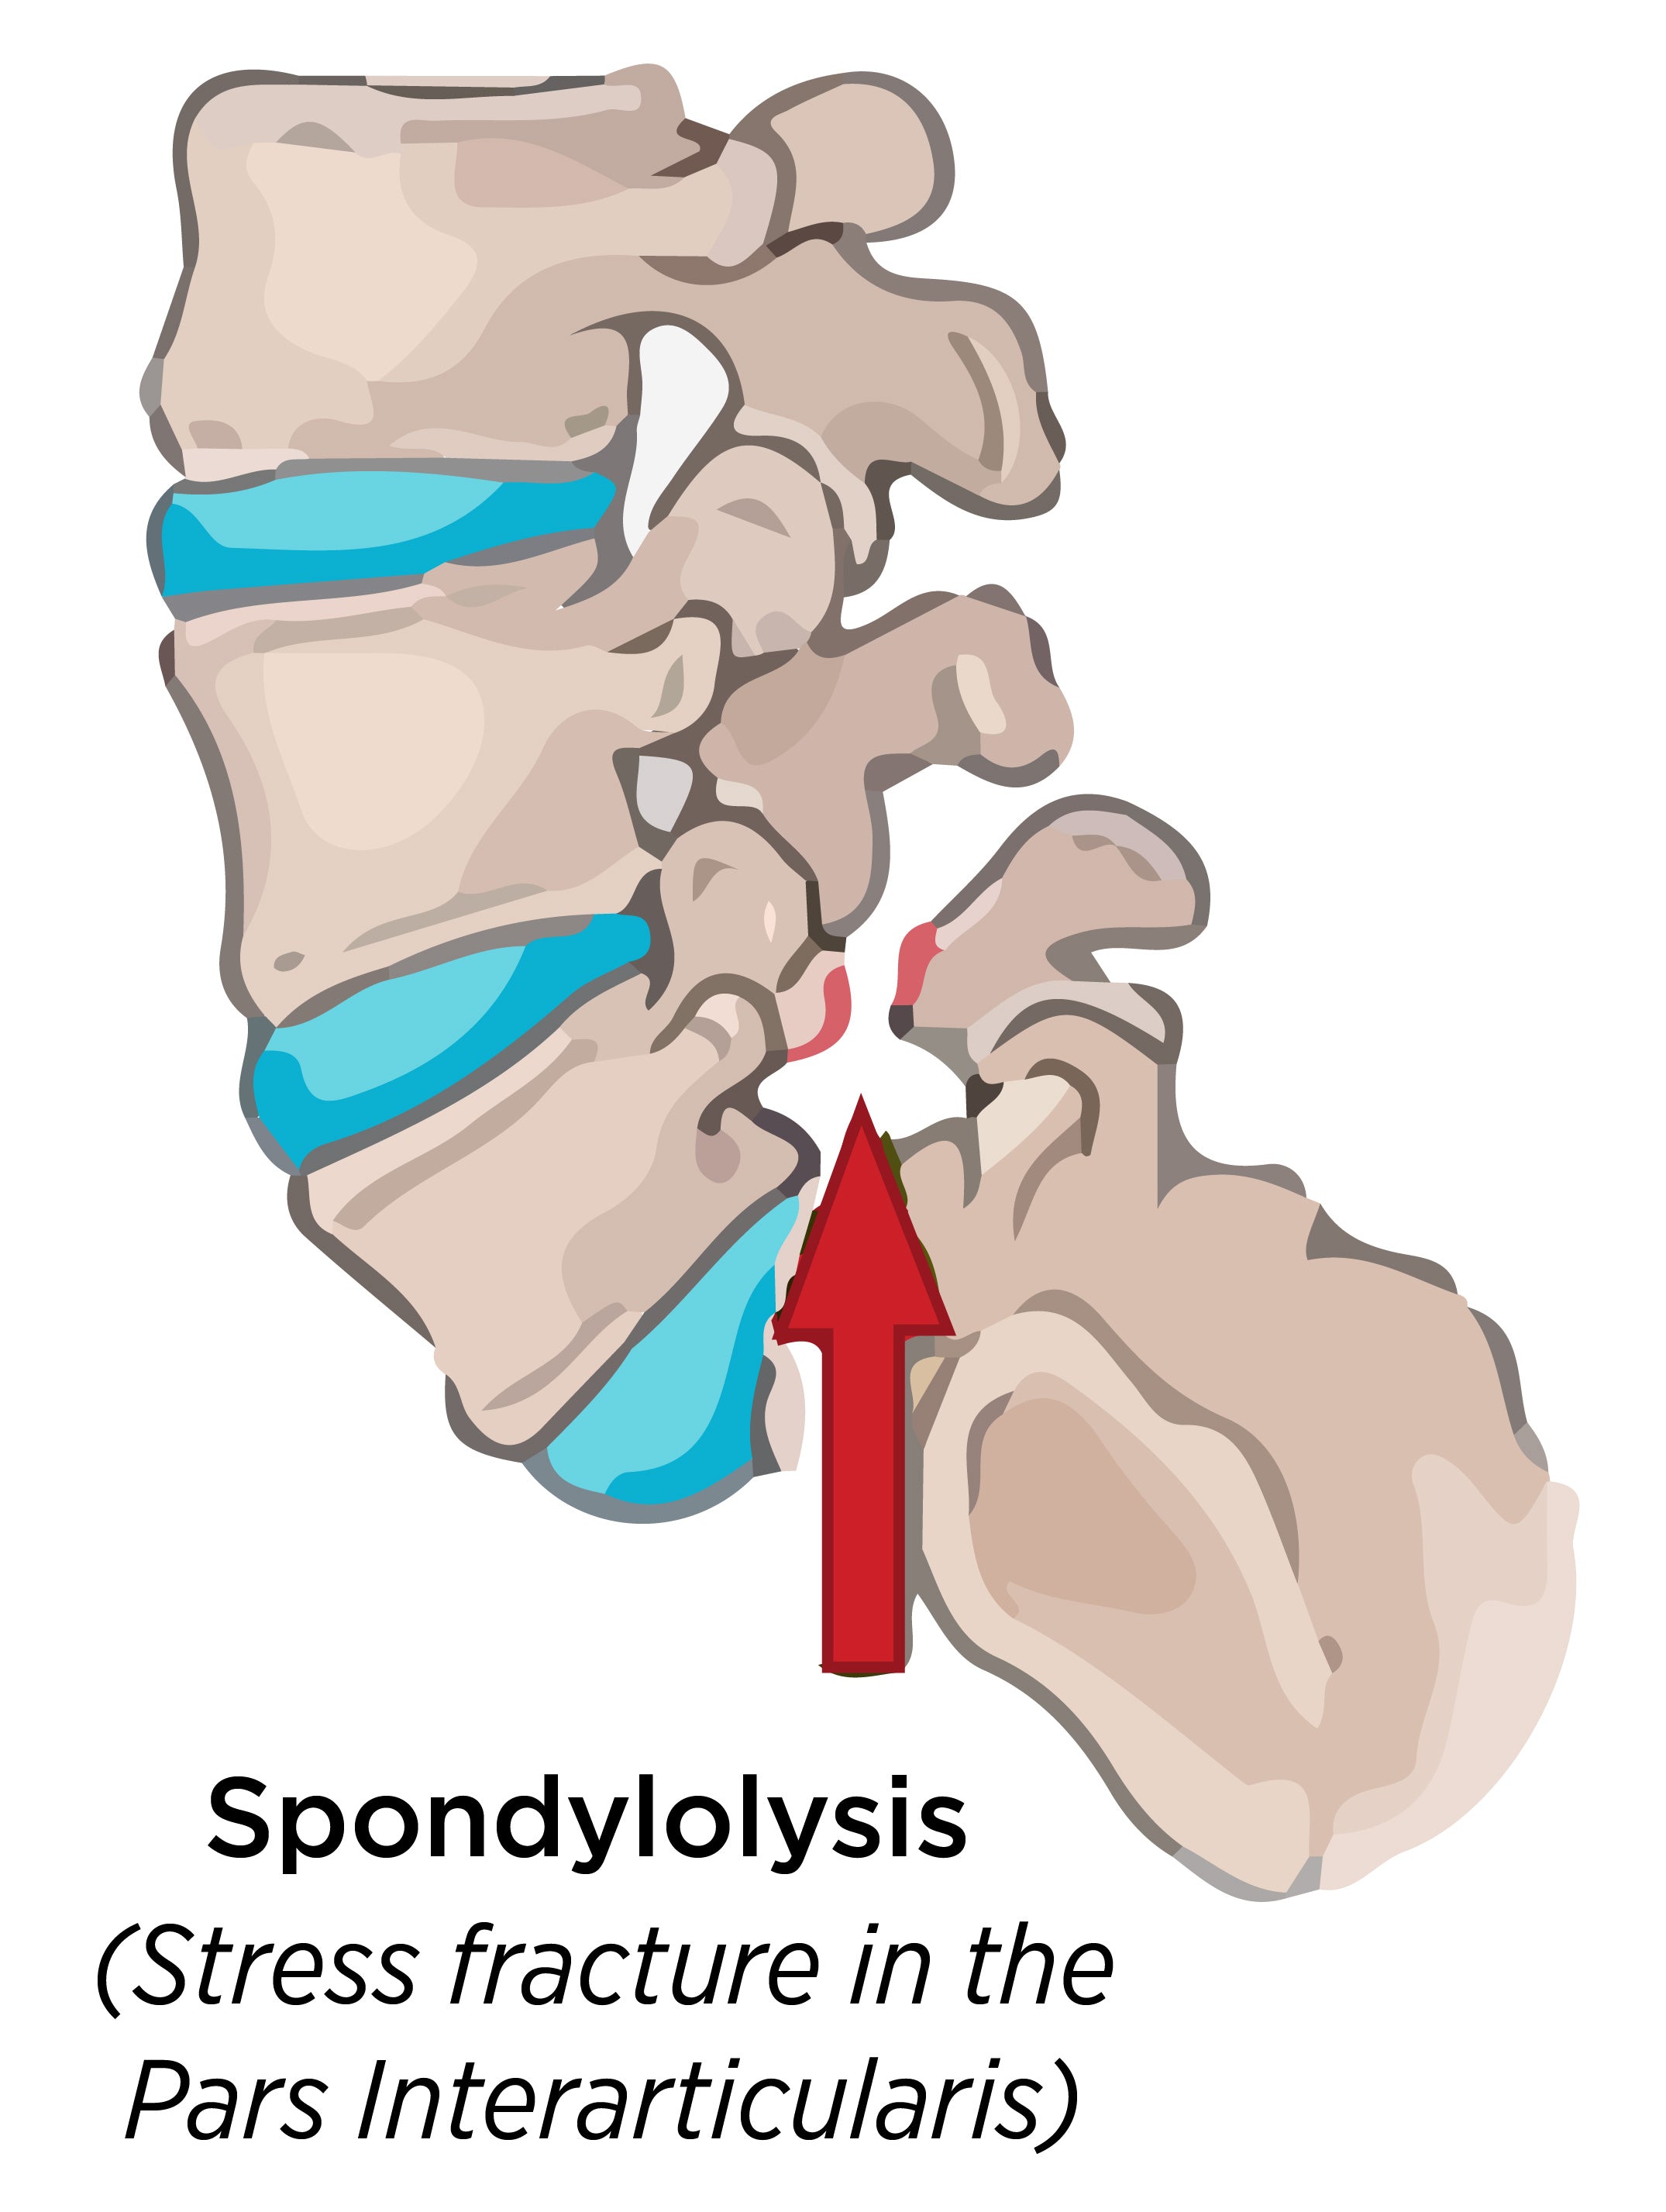 use this chart to understand what spondylolysis looks like in your spine